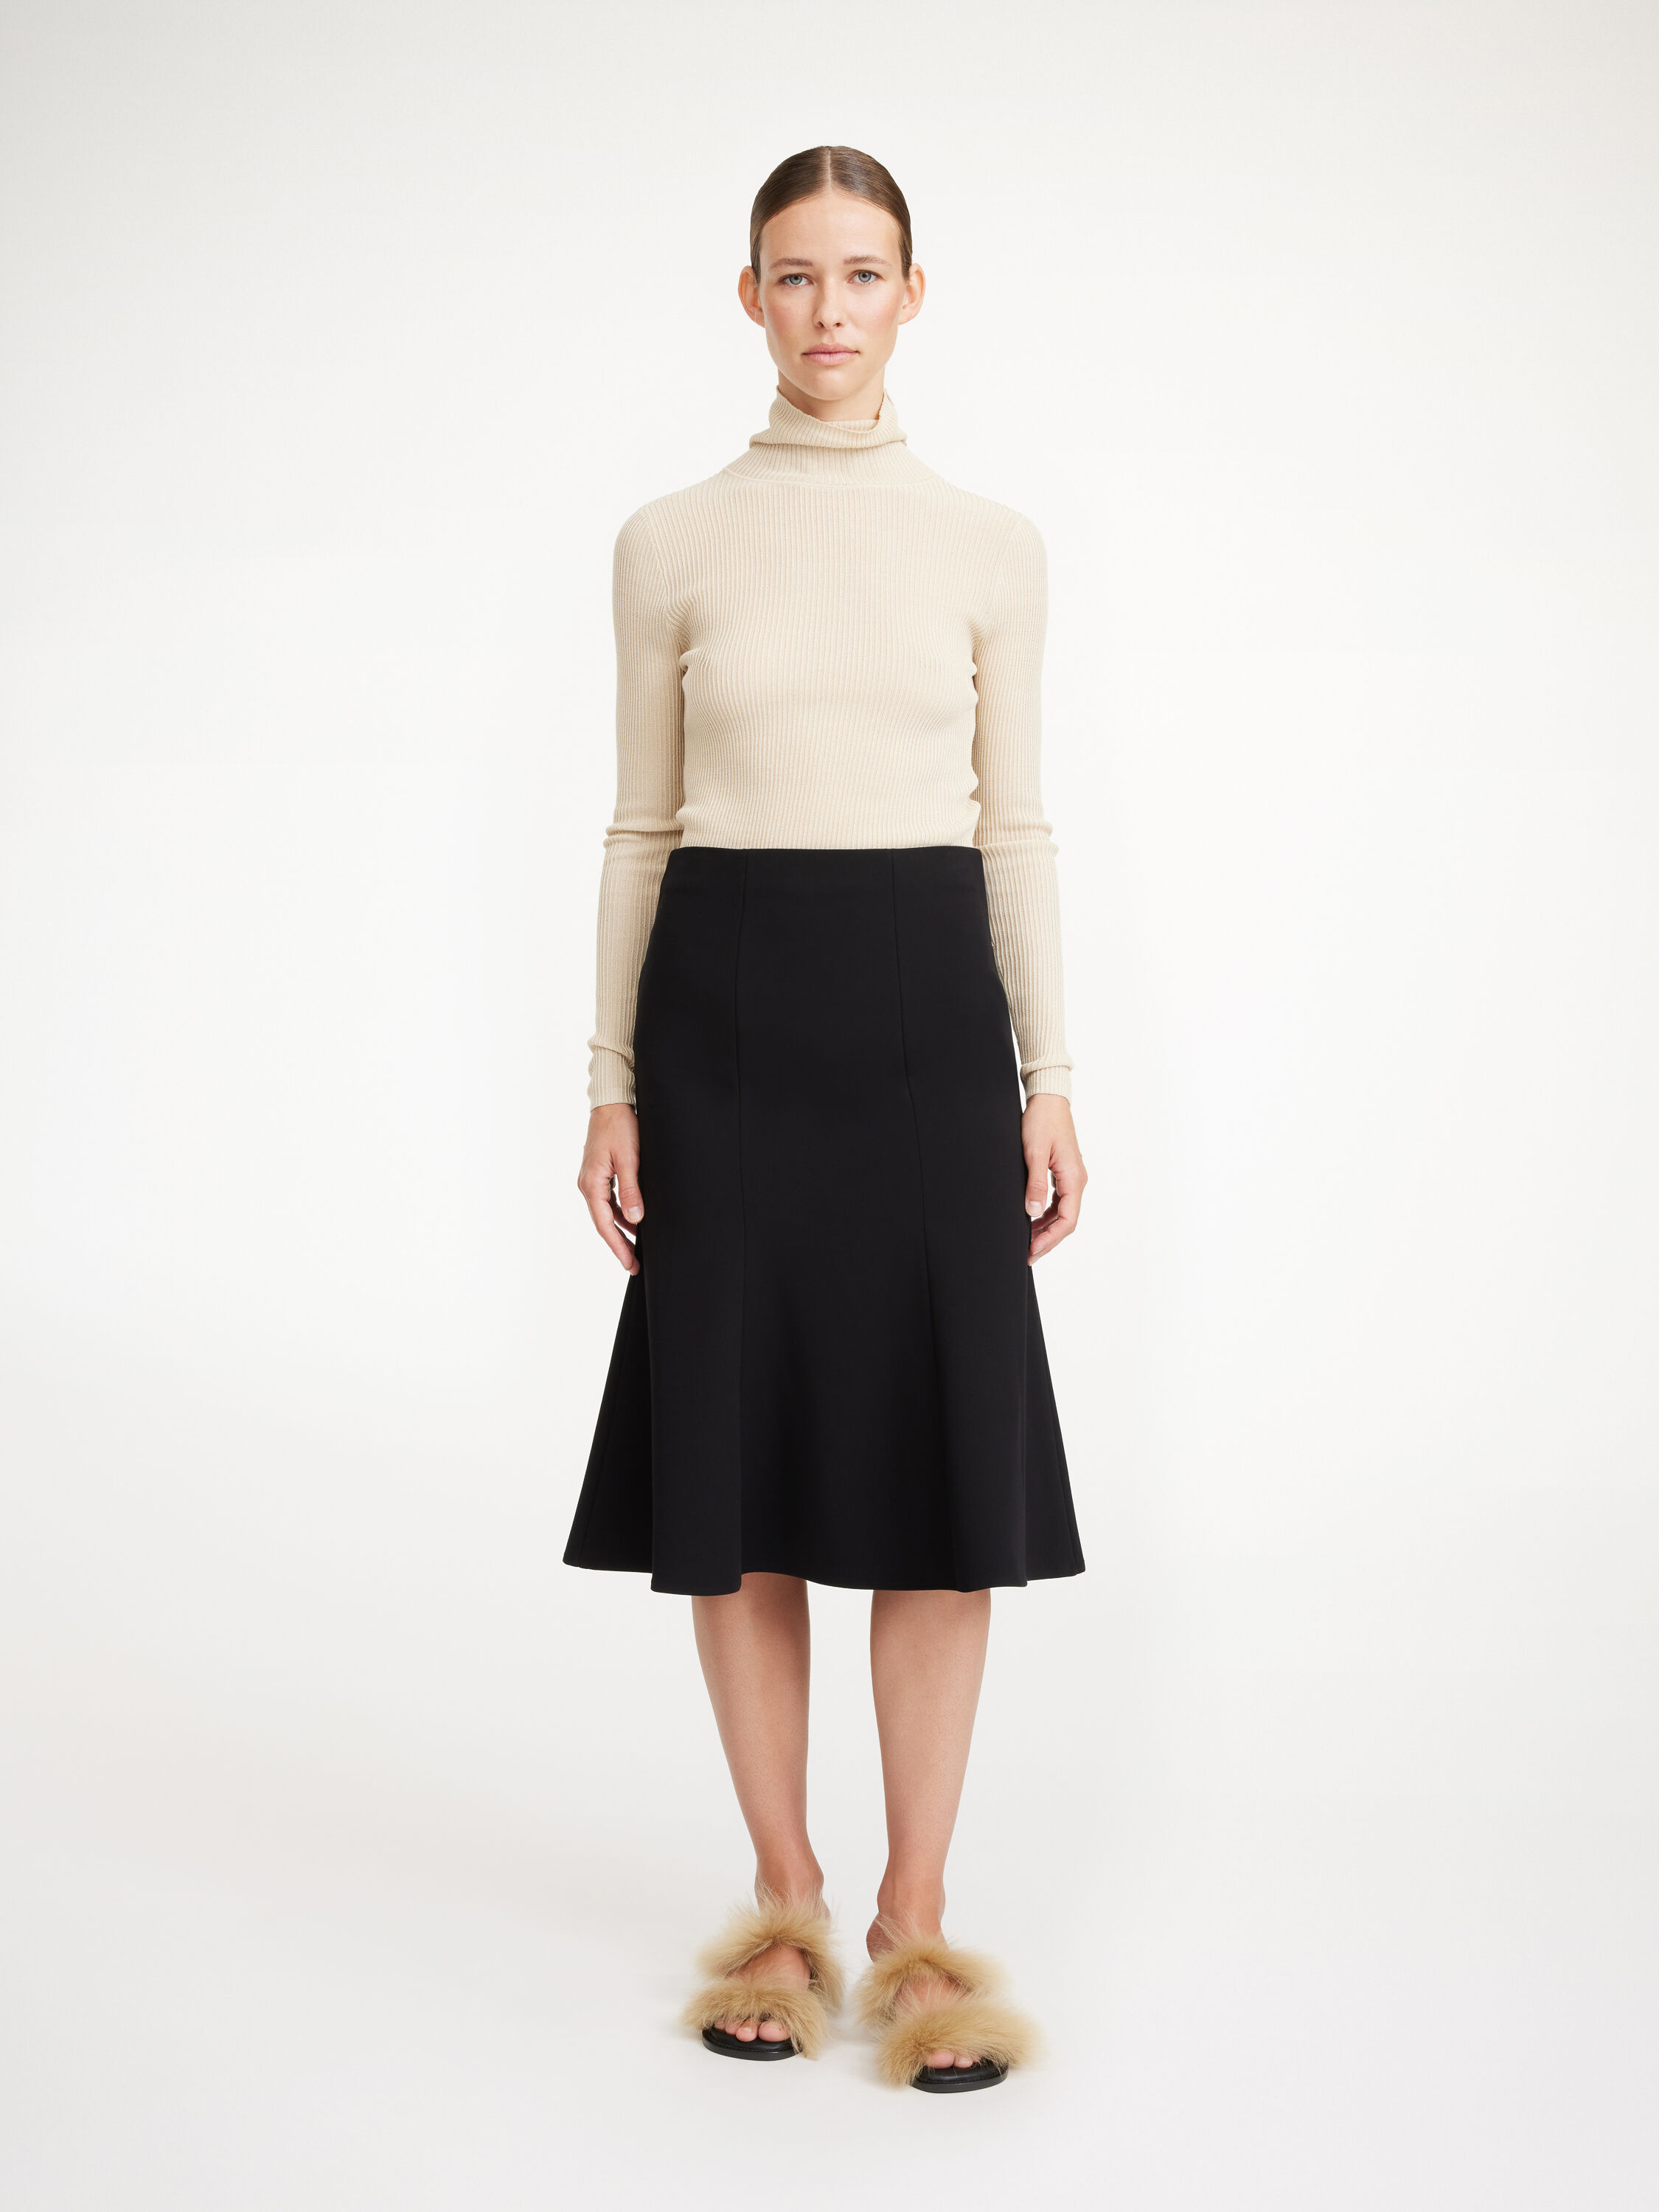 Skirts | See all styles here | By Malene Birger